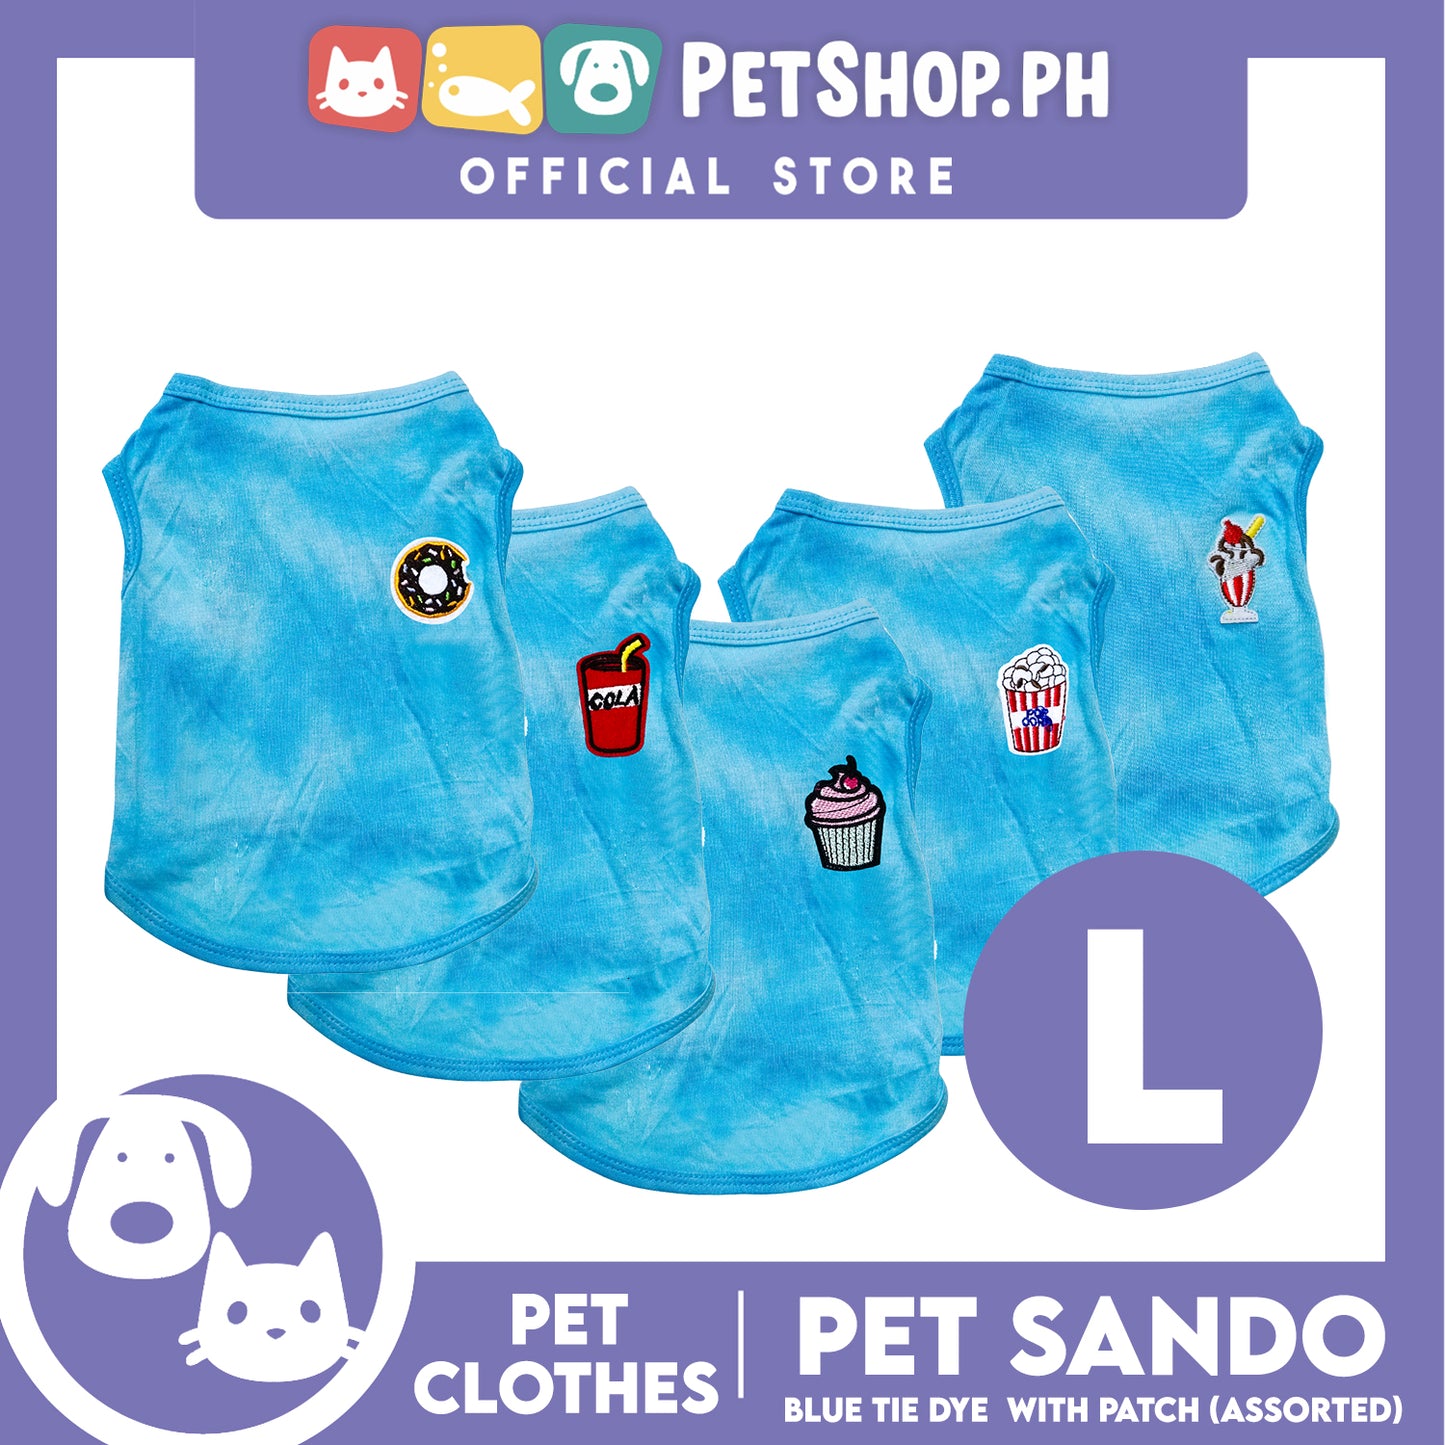 Pet Sando Blue Tie Dye with Assorted Patch Design (Large) Pet Shirt Clothes Perfect for Dogs